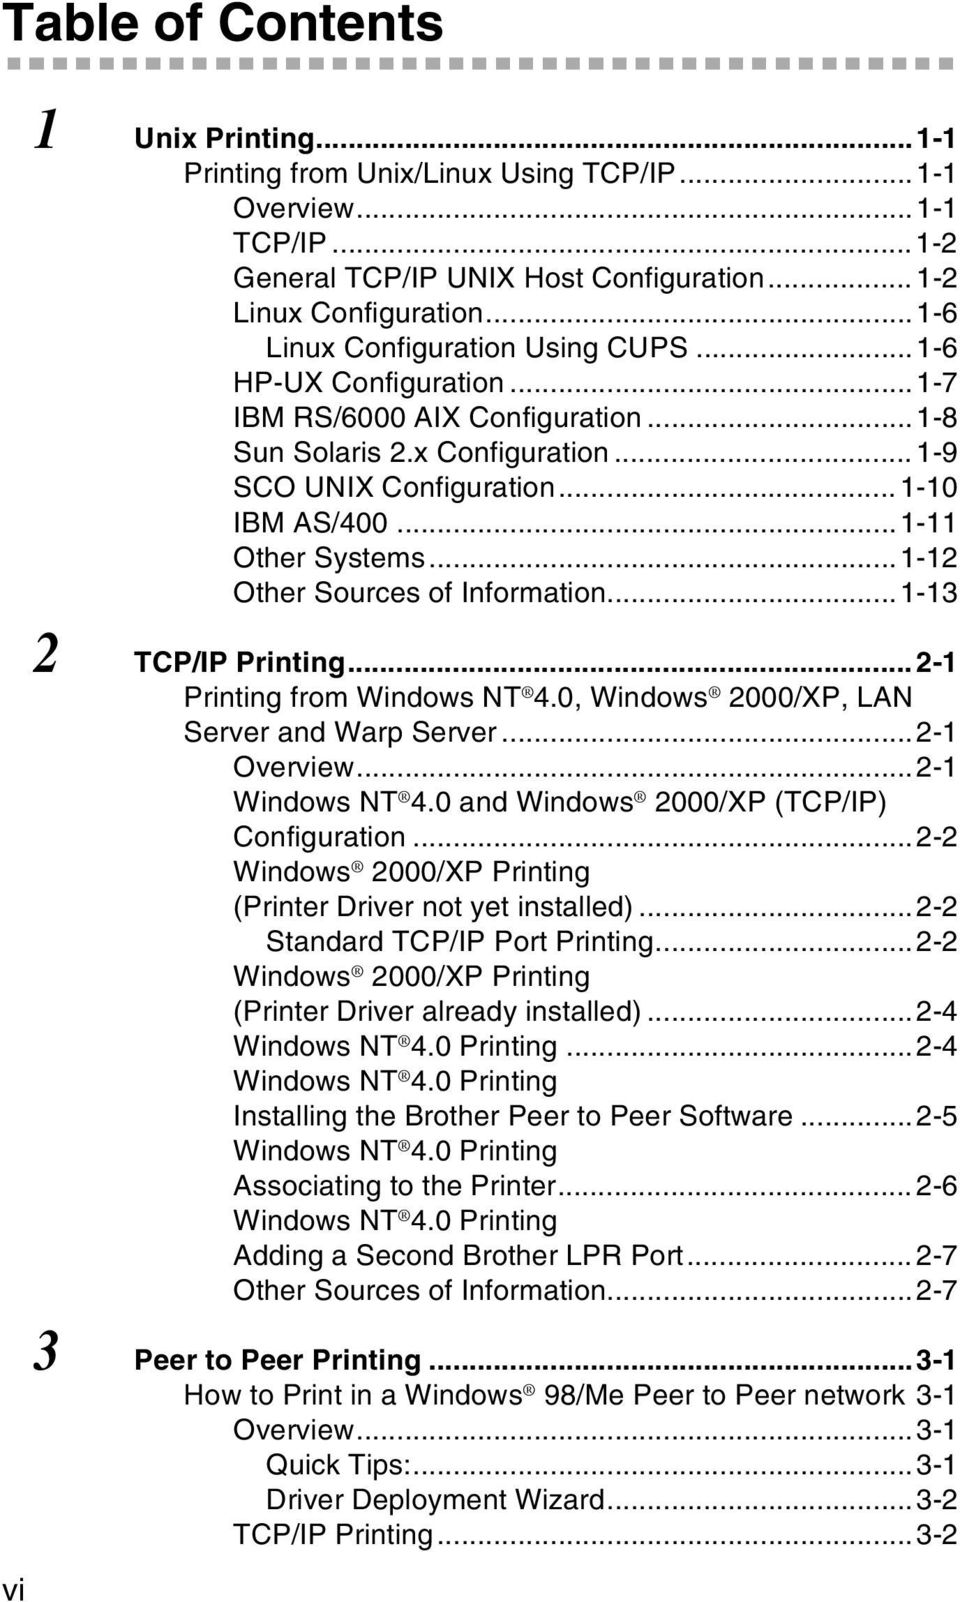 ..1-11 Other Systems...1-12 Other Sources of Information...1-13 2 TCP/IP Printing...2-1 Printing from Windows NT 4.0, Windows 2000/XP, LAN Server and Warp Server...2-1 Overview...2-1 Windows NT 4.